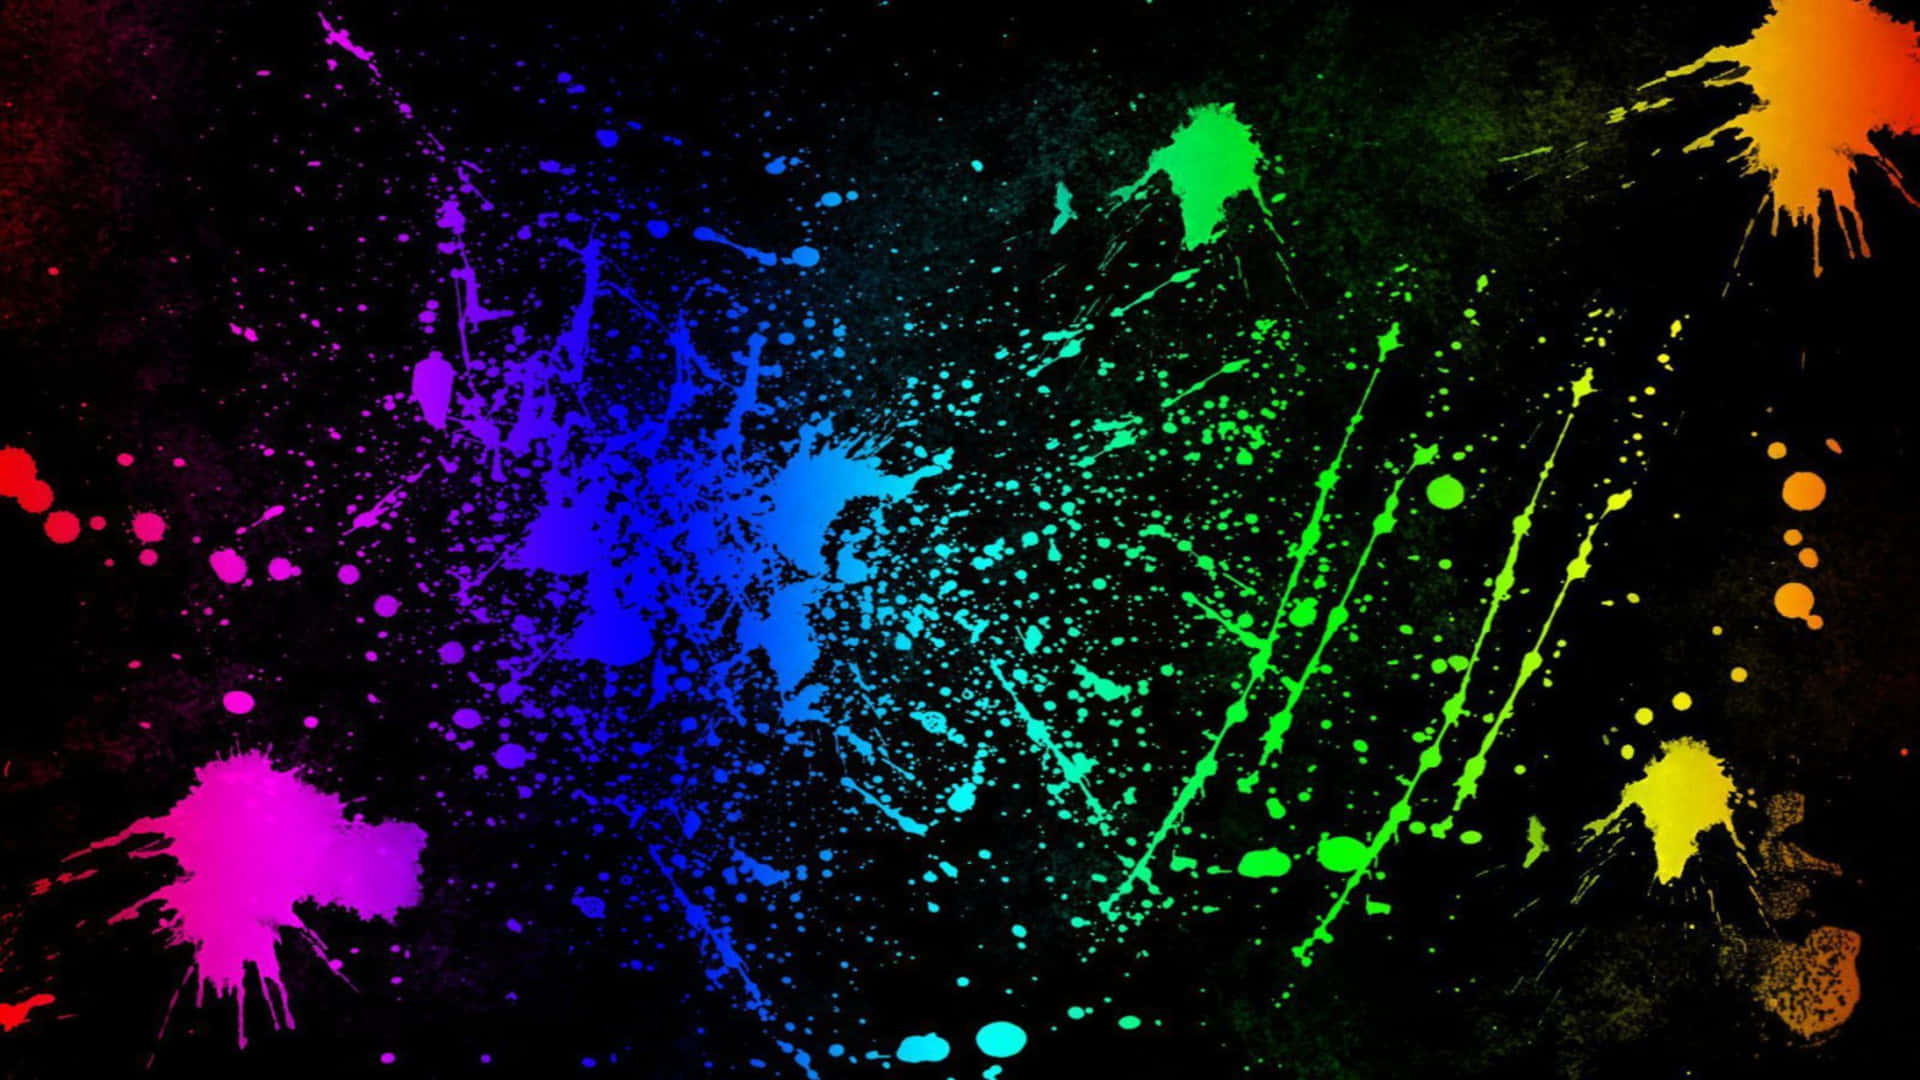 Colorful Paint Splatters On A Black Background